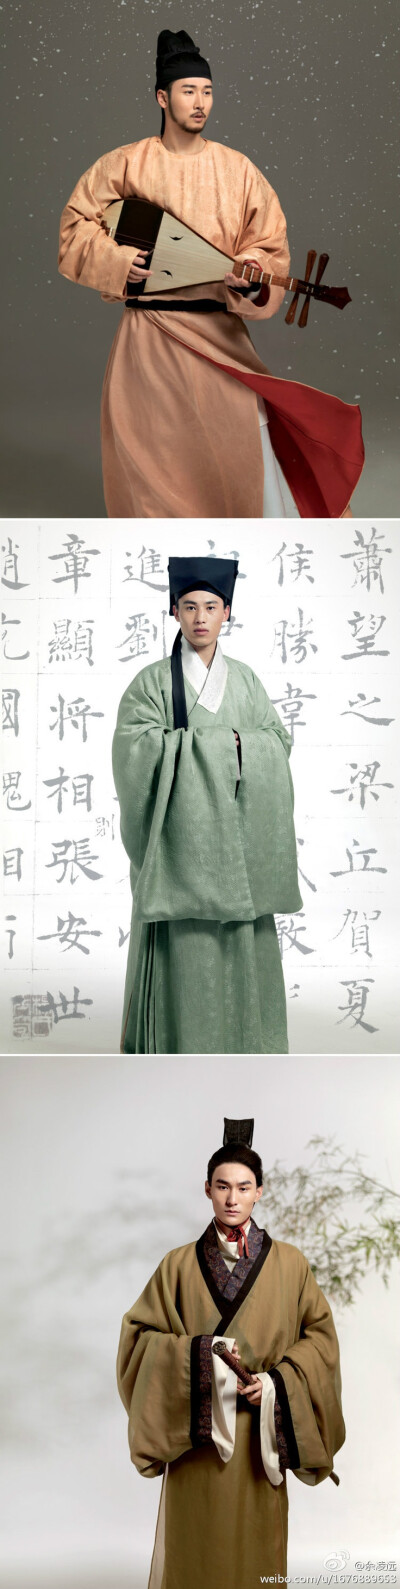 Han Dynasty clothing examples